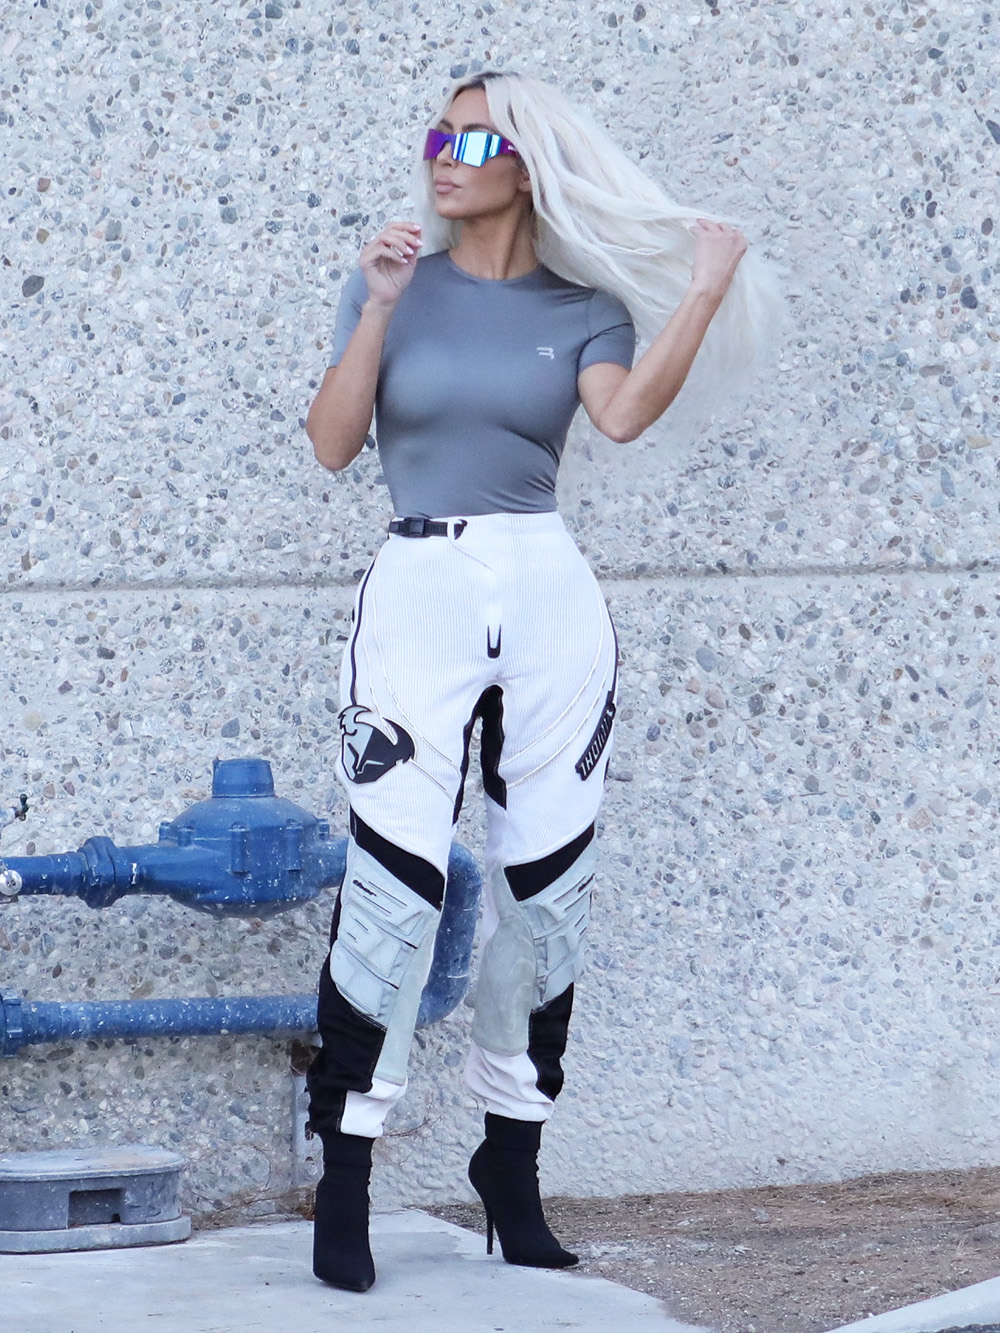 Kylie Jenner's Adidas Outfit Matches Her Rolls Royce & Khloe Loves